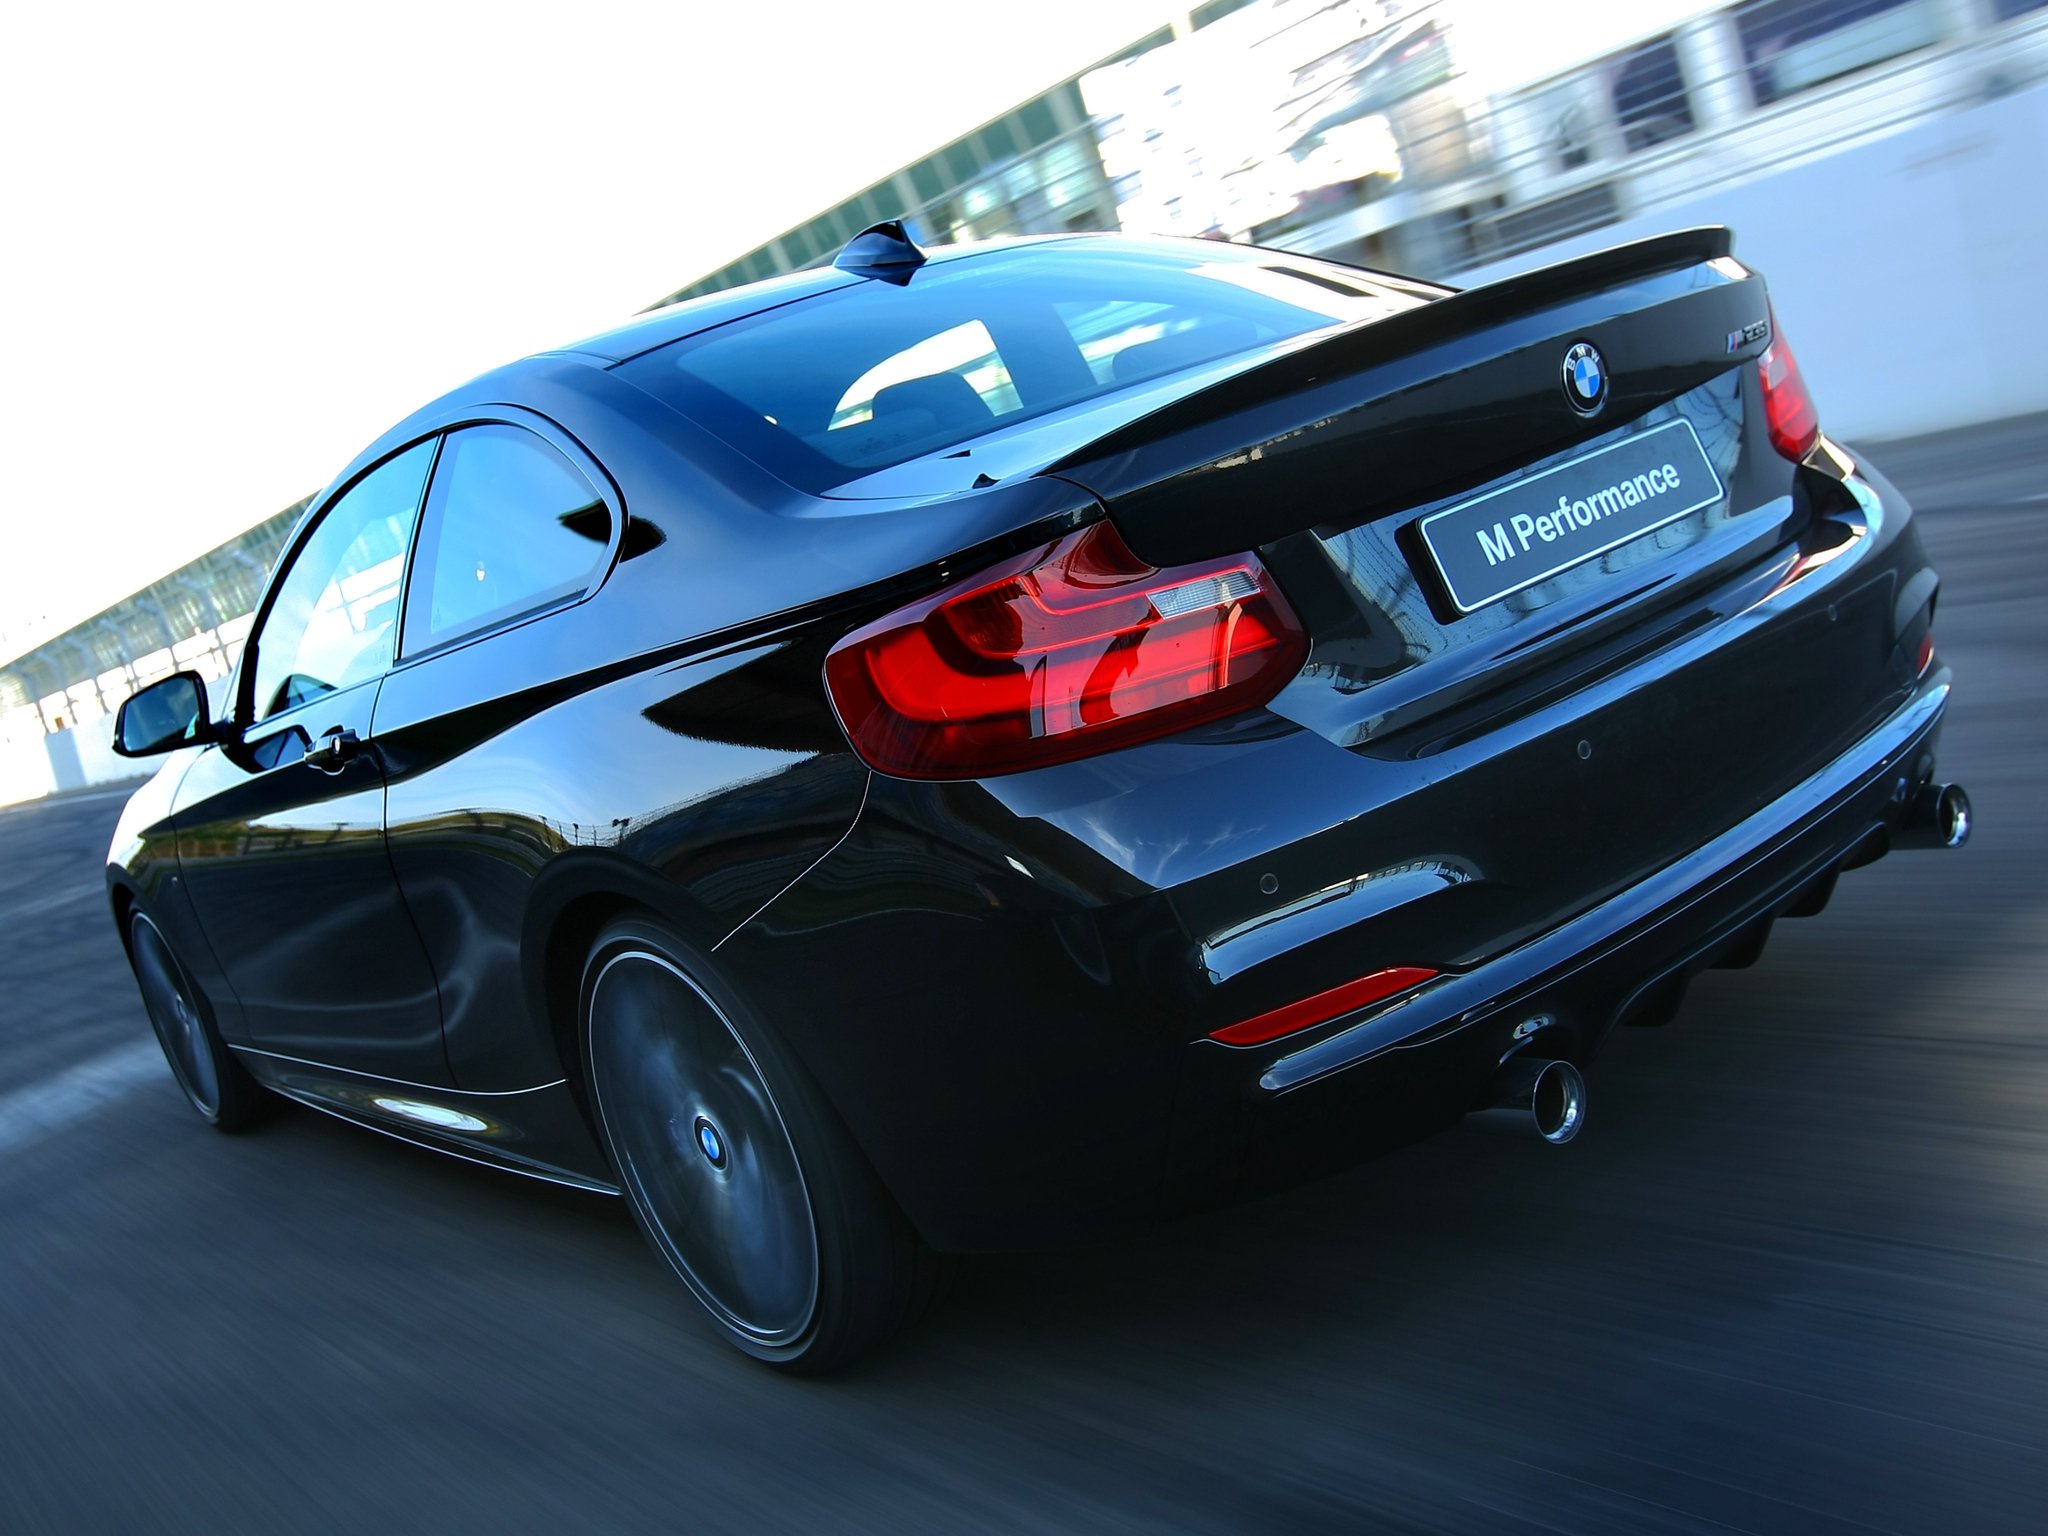 2014, Bmw, M235i, Coupe, Track, Edition,  f22 Wallpaper